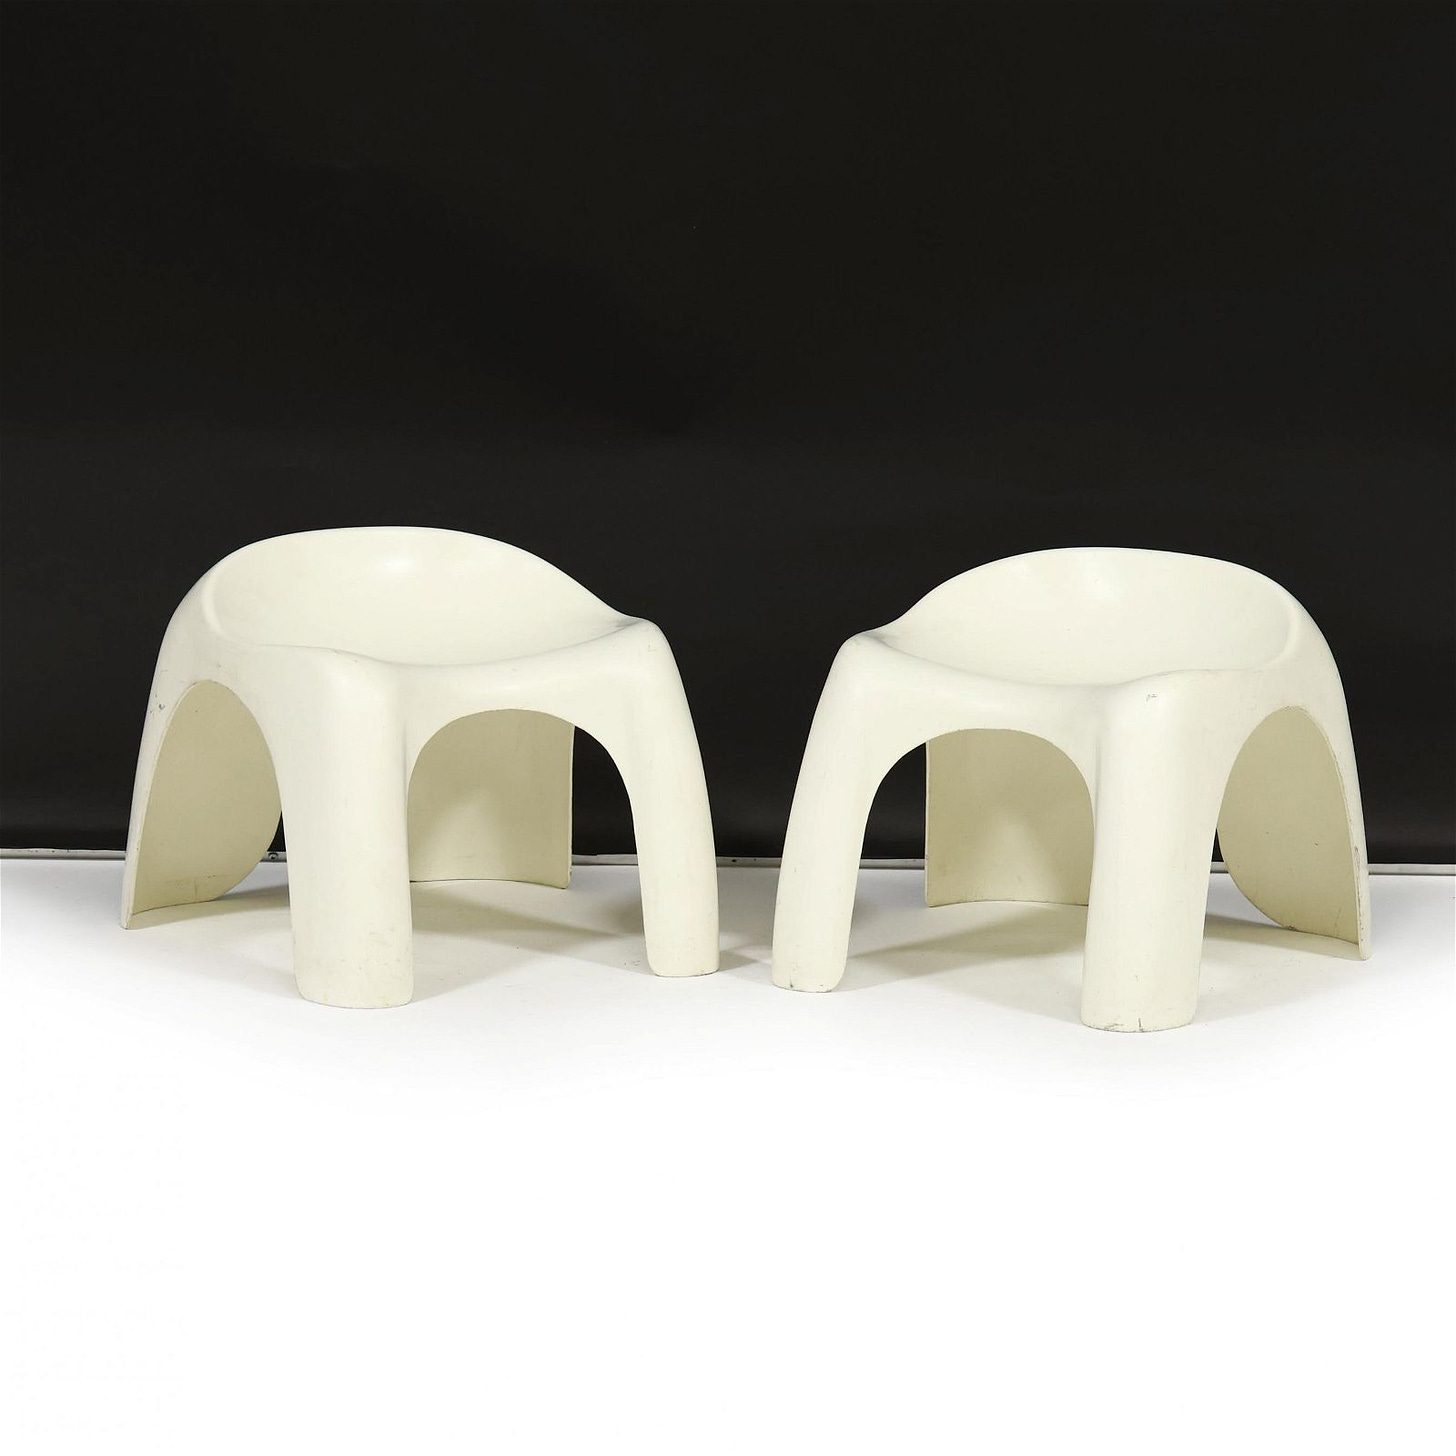 Stacy Dukes (American, 1934-2019), Pair of Efebo Children's Stools